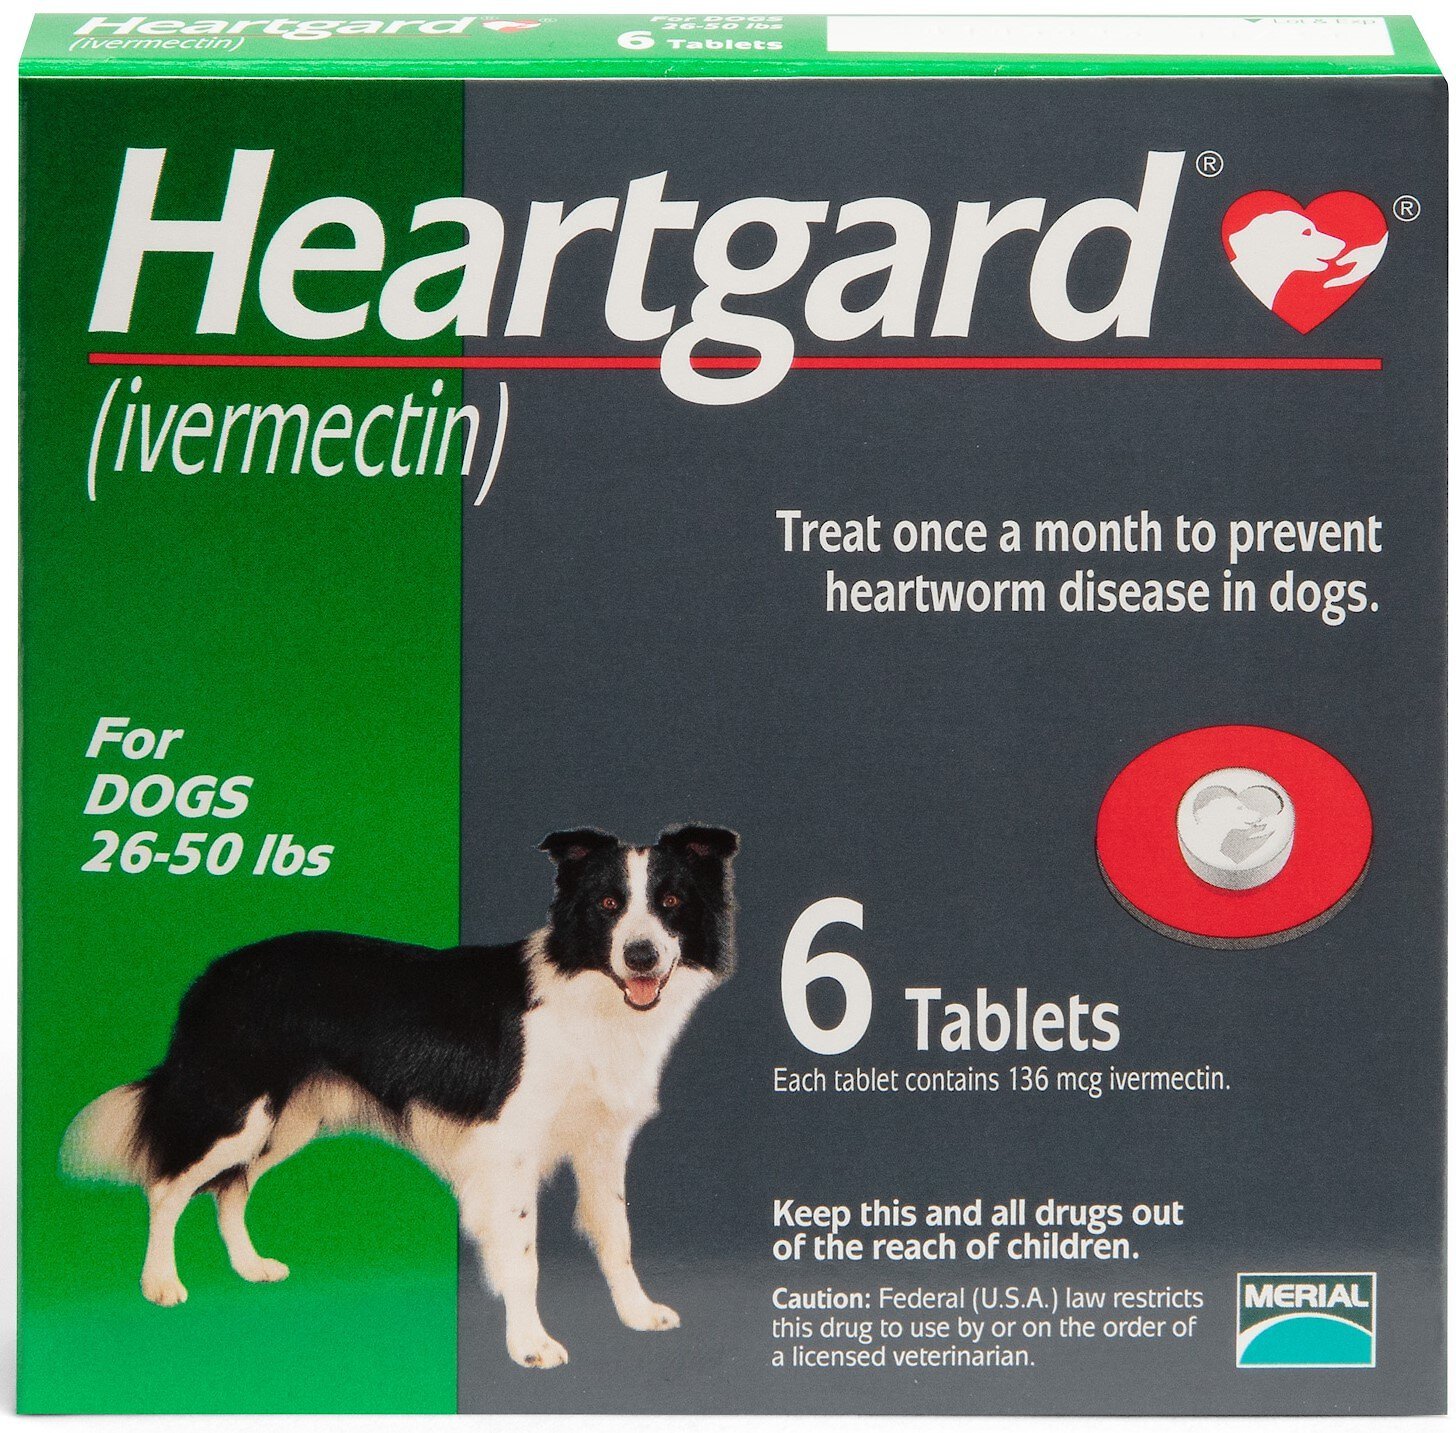 ivermectin safe for dogs